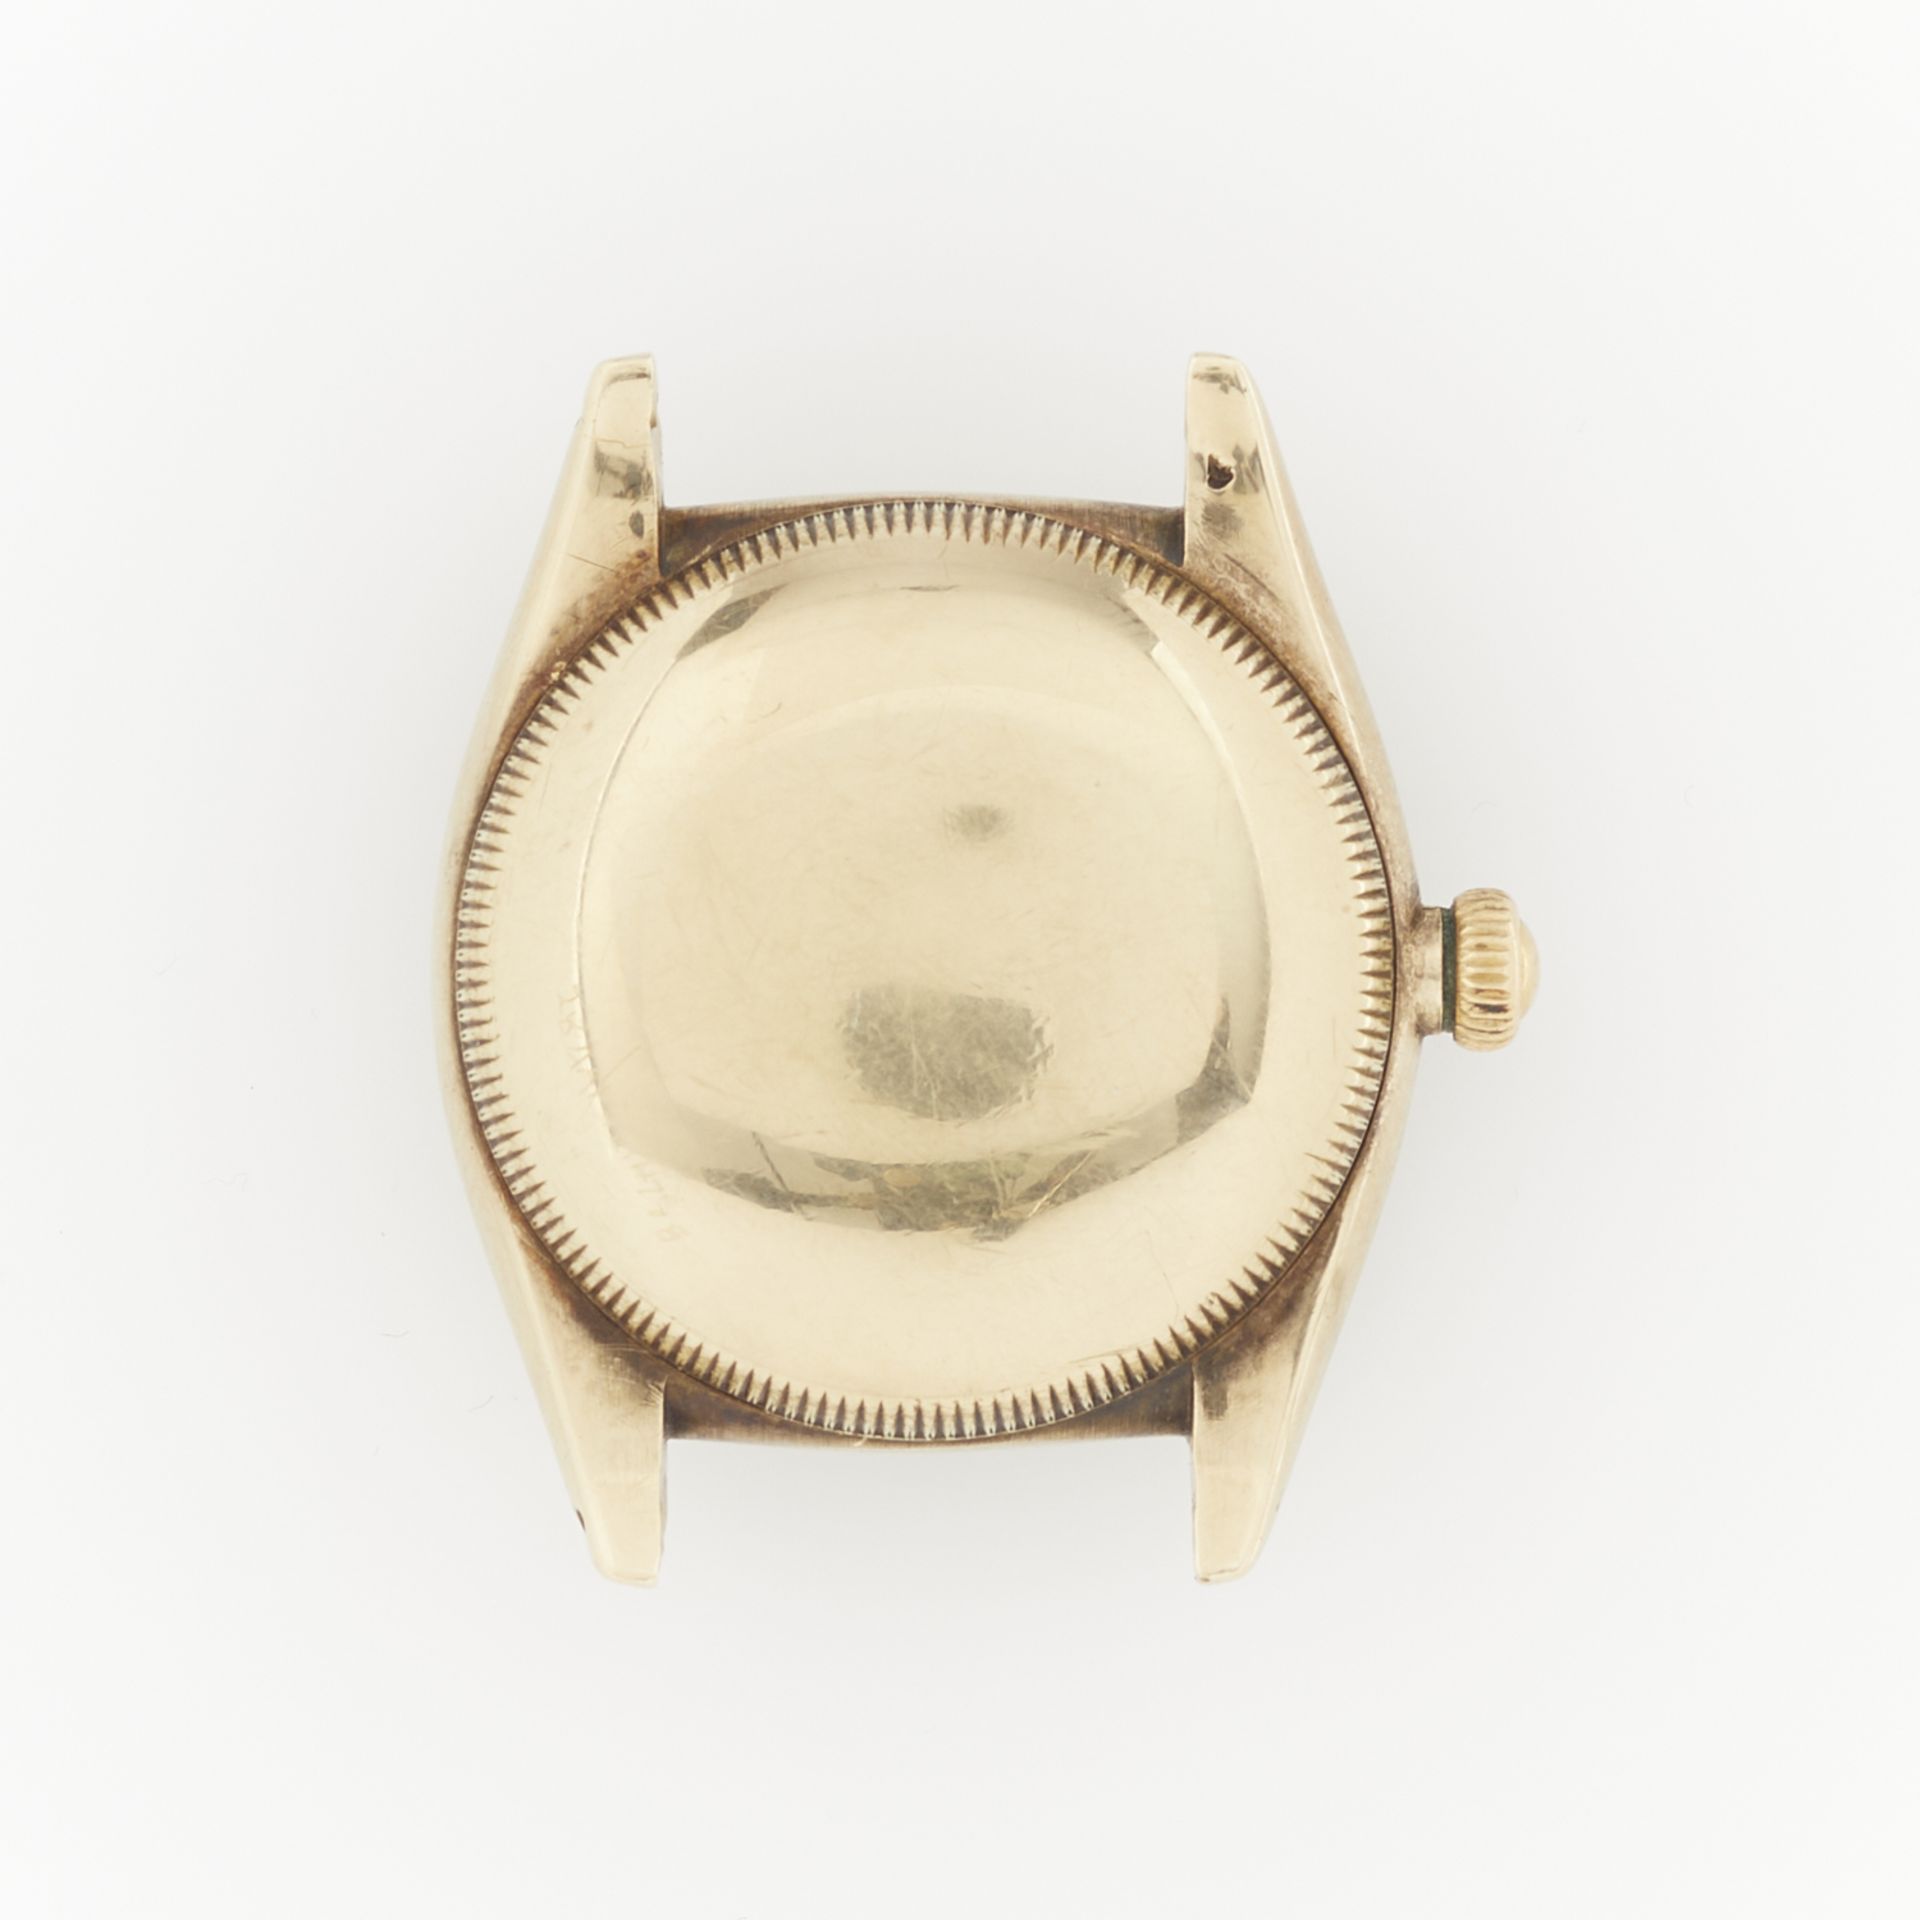 14k Rolex Oyster Perpetual 4777 Bubble Back - Image 5 of 14